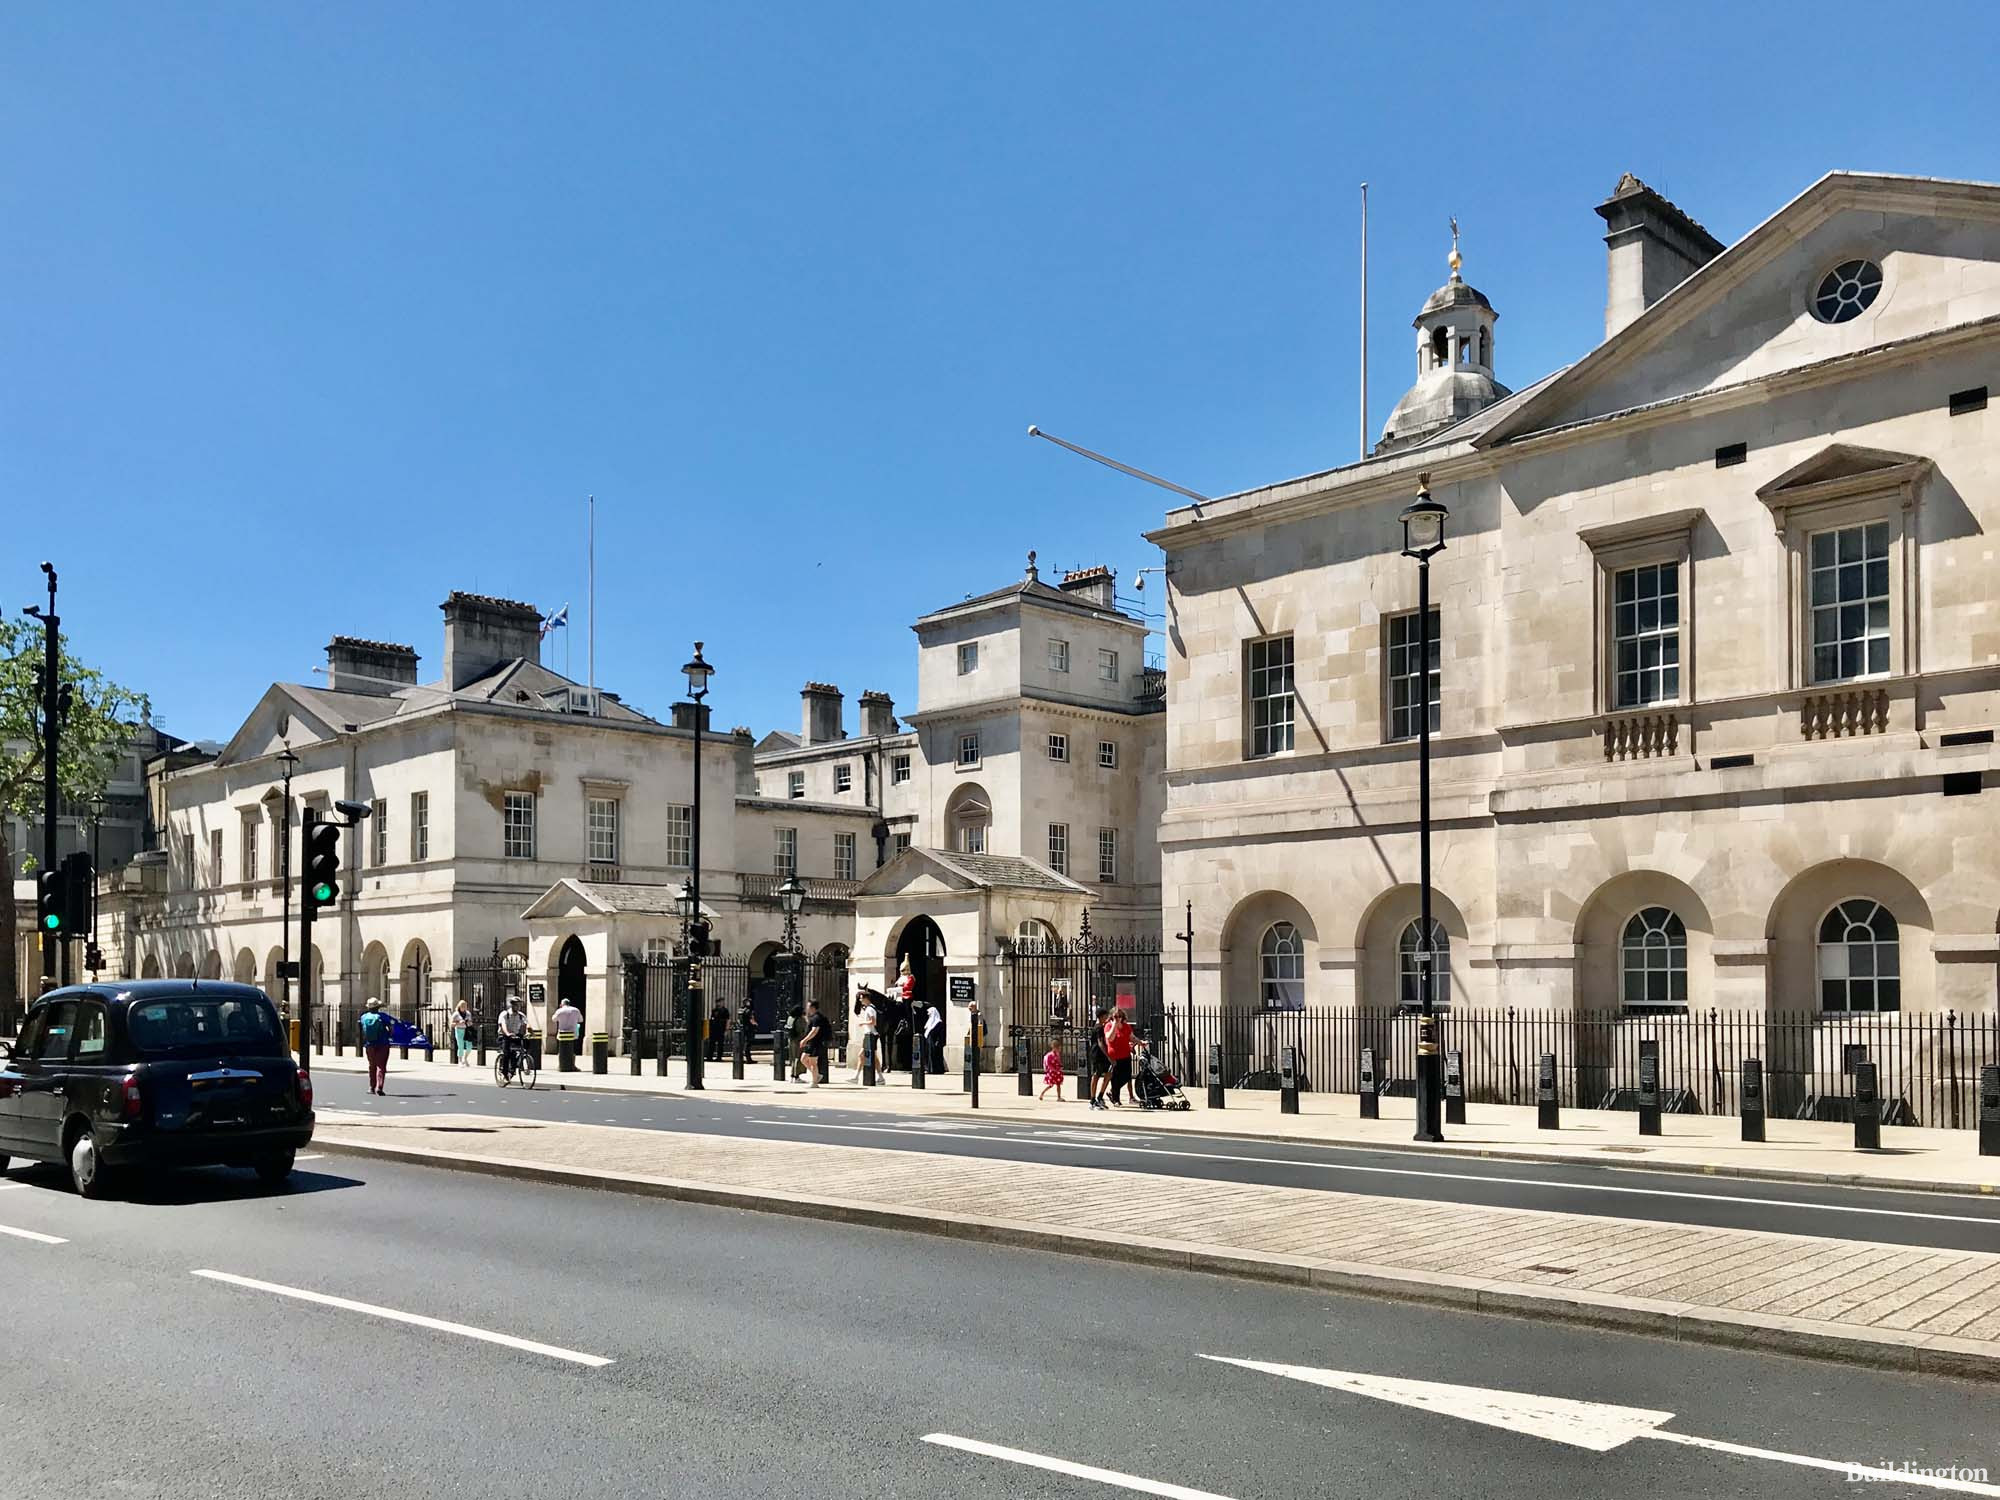 Household Cavalry Museum at Horse Guards building in Whitehall, London SW1.